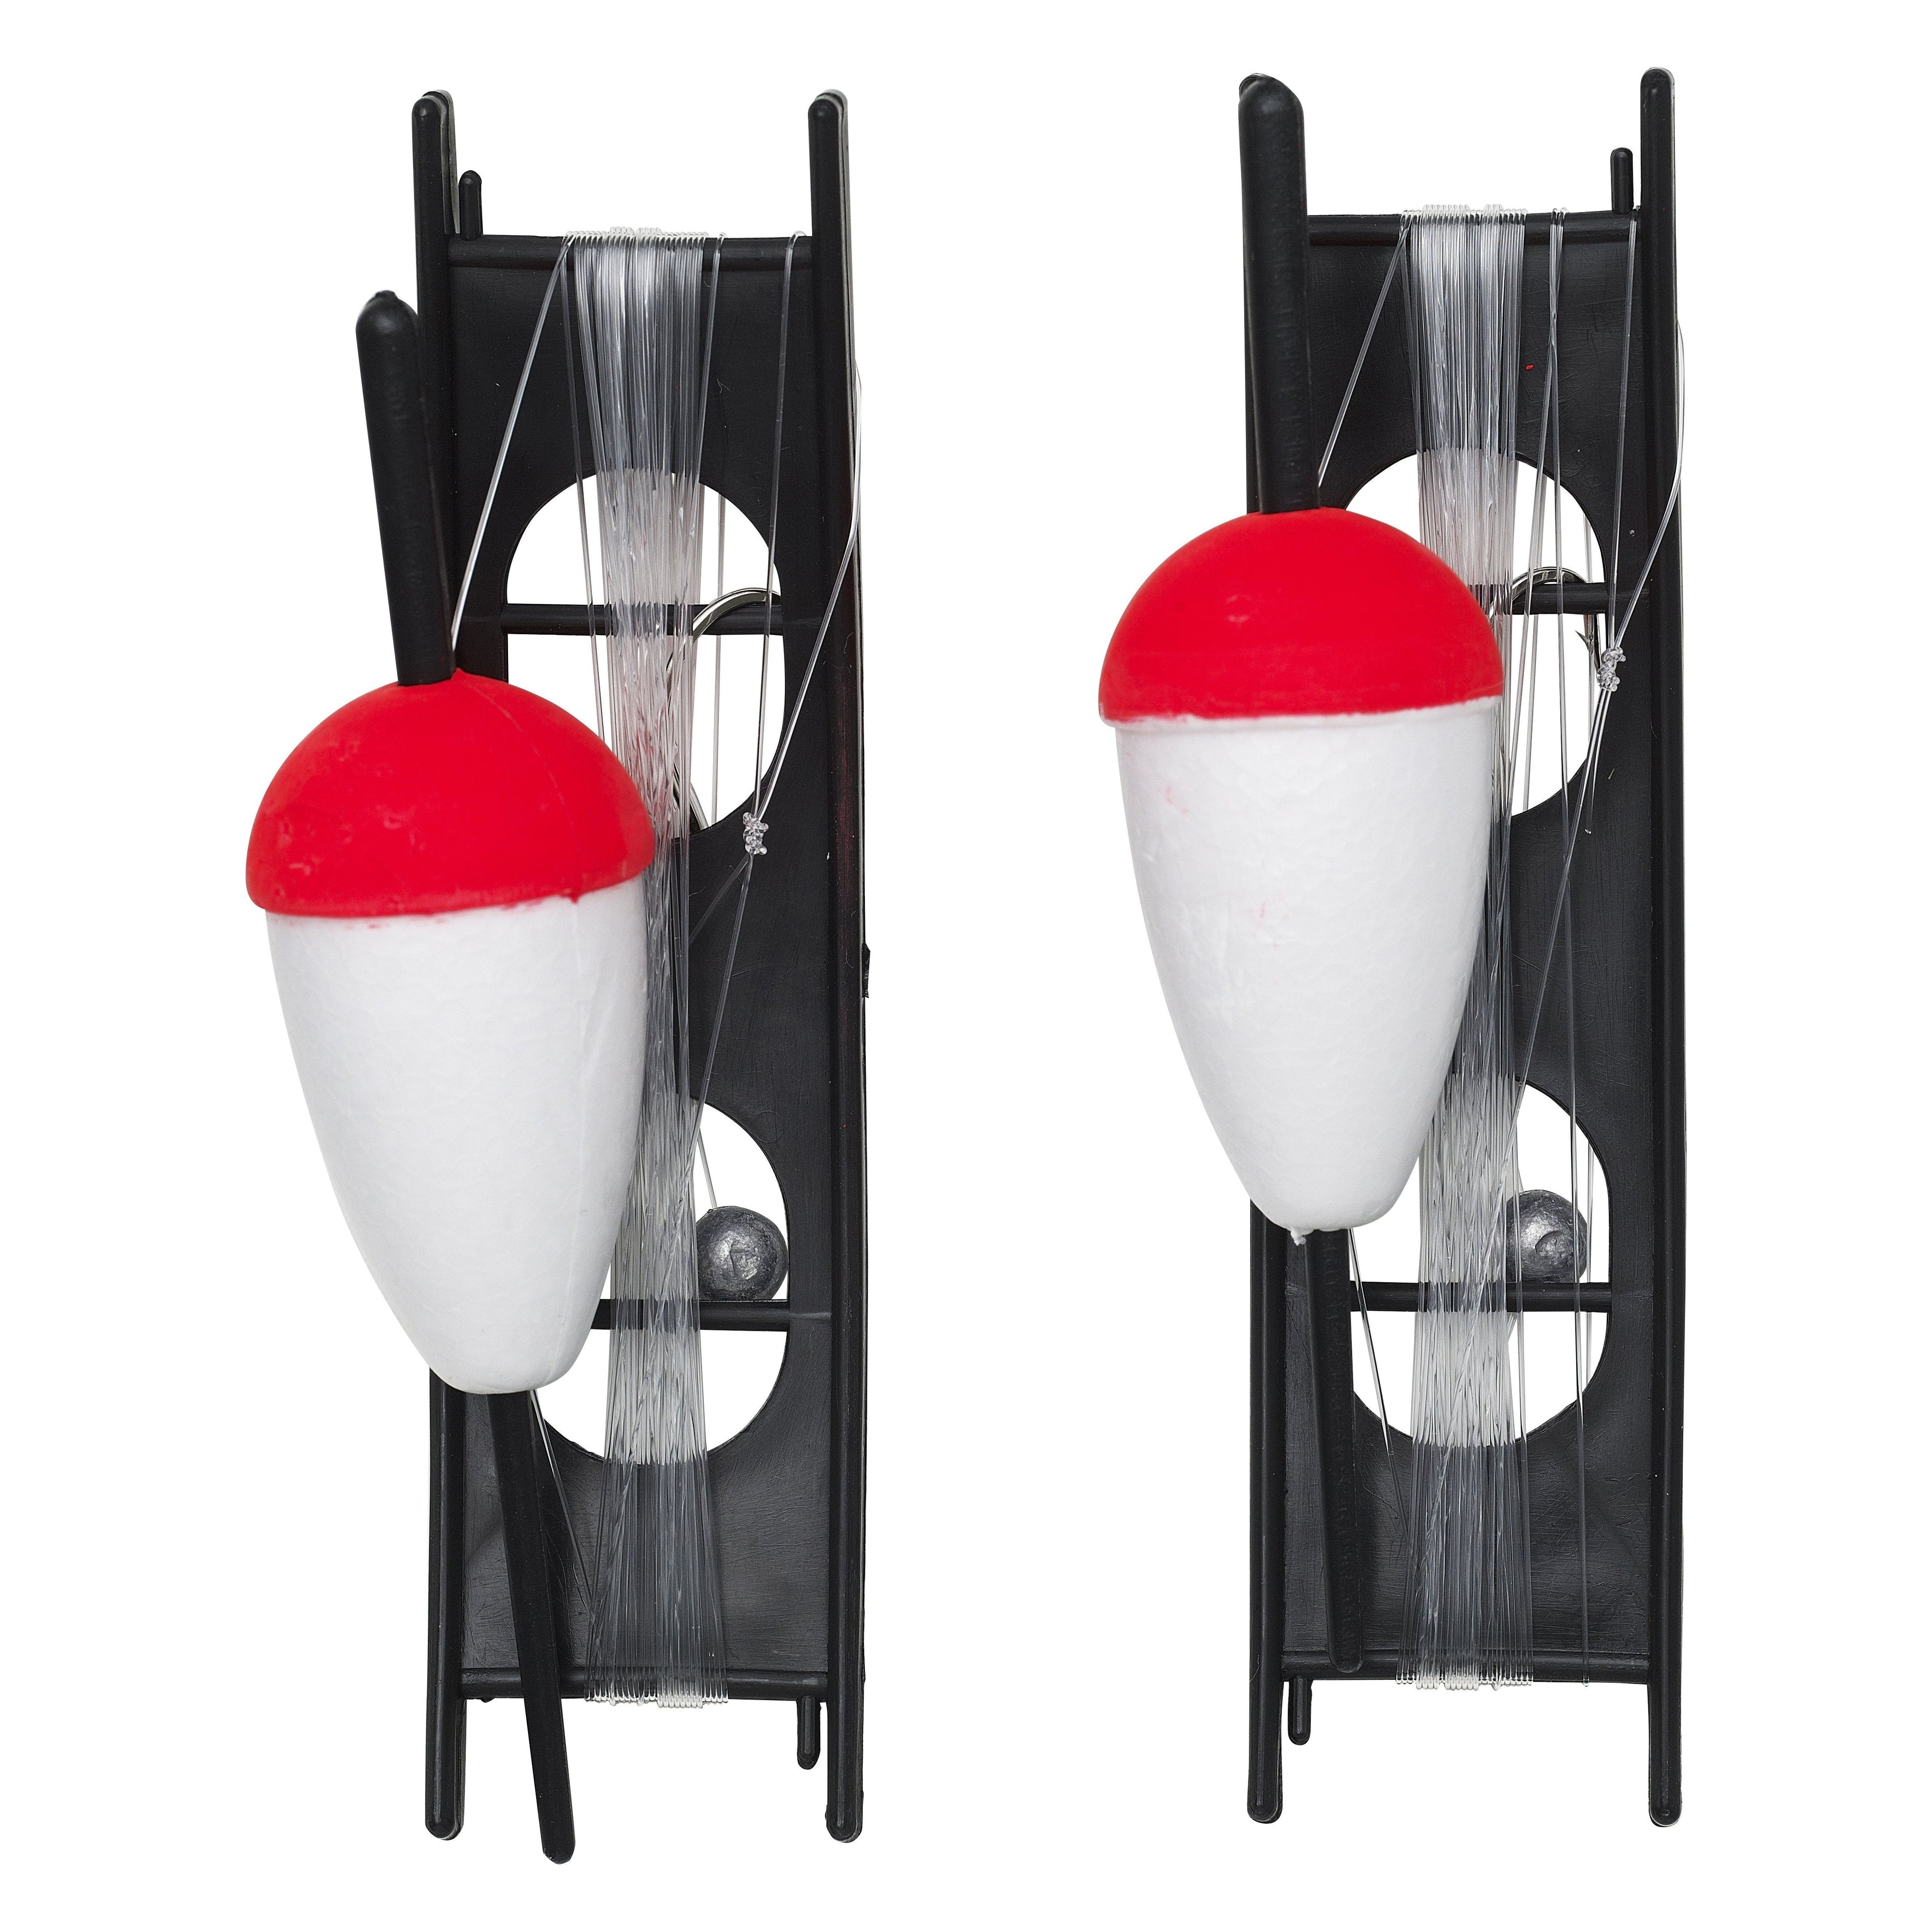 F666-228-073 KINETIC CLASSIC FLOAT KIT 50MM RED/WHITE 2PCS AT TED JOHNSONS PROBLEM SOLVED